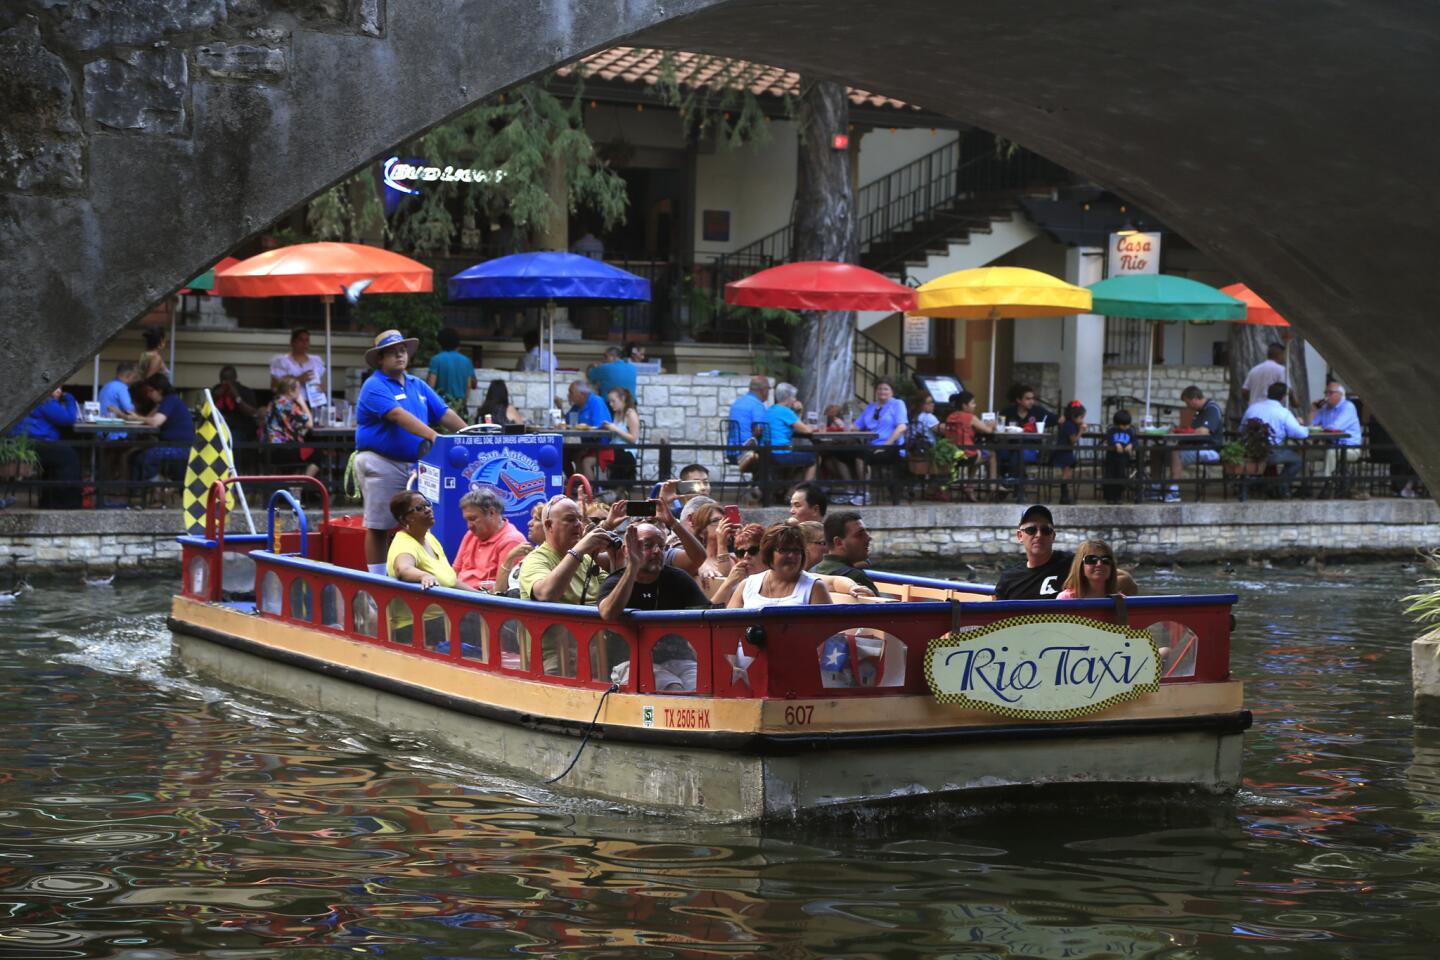 One of the Rio Taxi boats floats past the colorful umbrellas at Casa Rio Restaurant along the riverwalk in San Antonio.